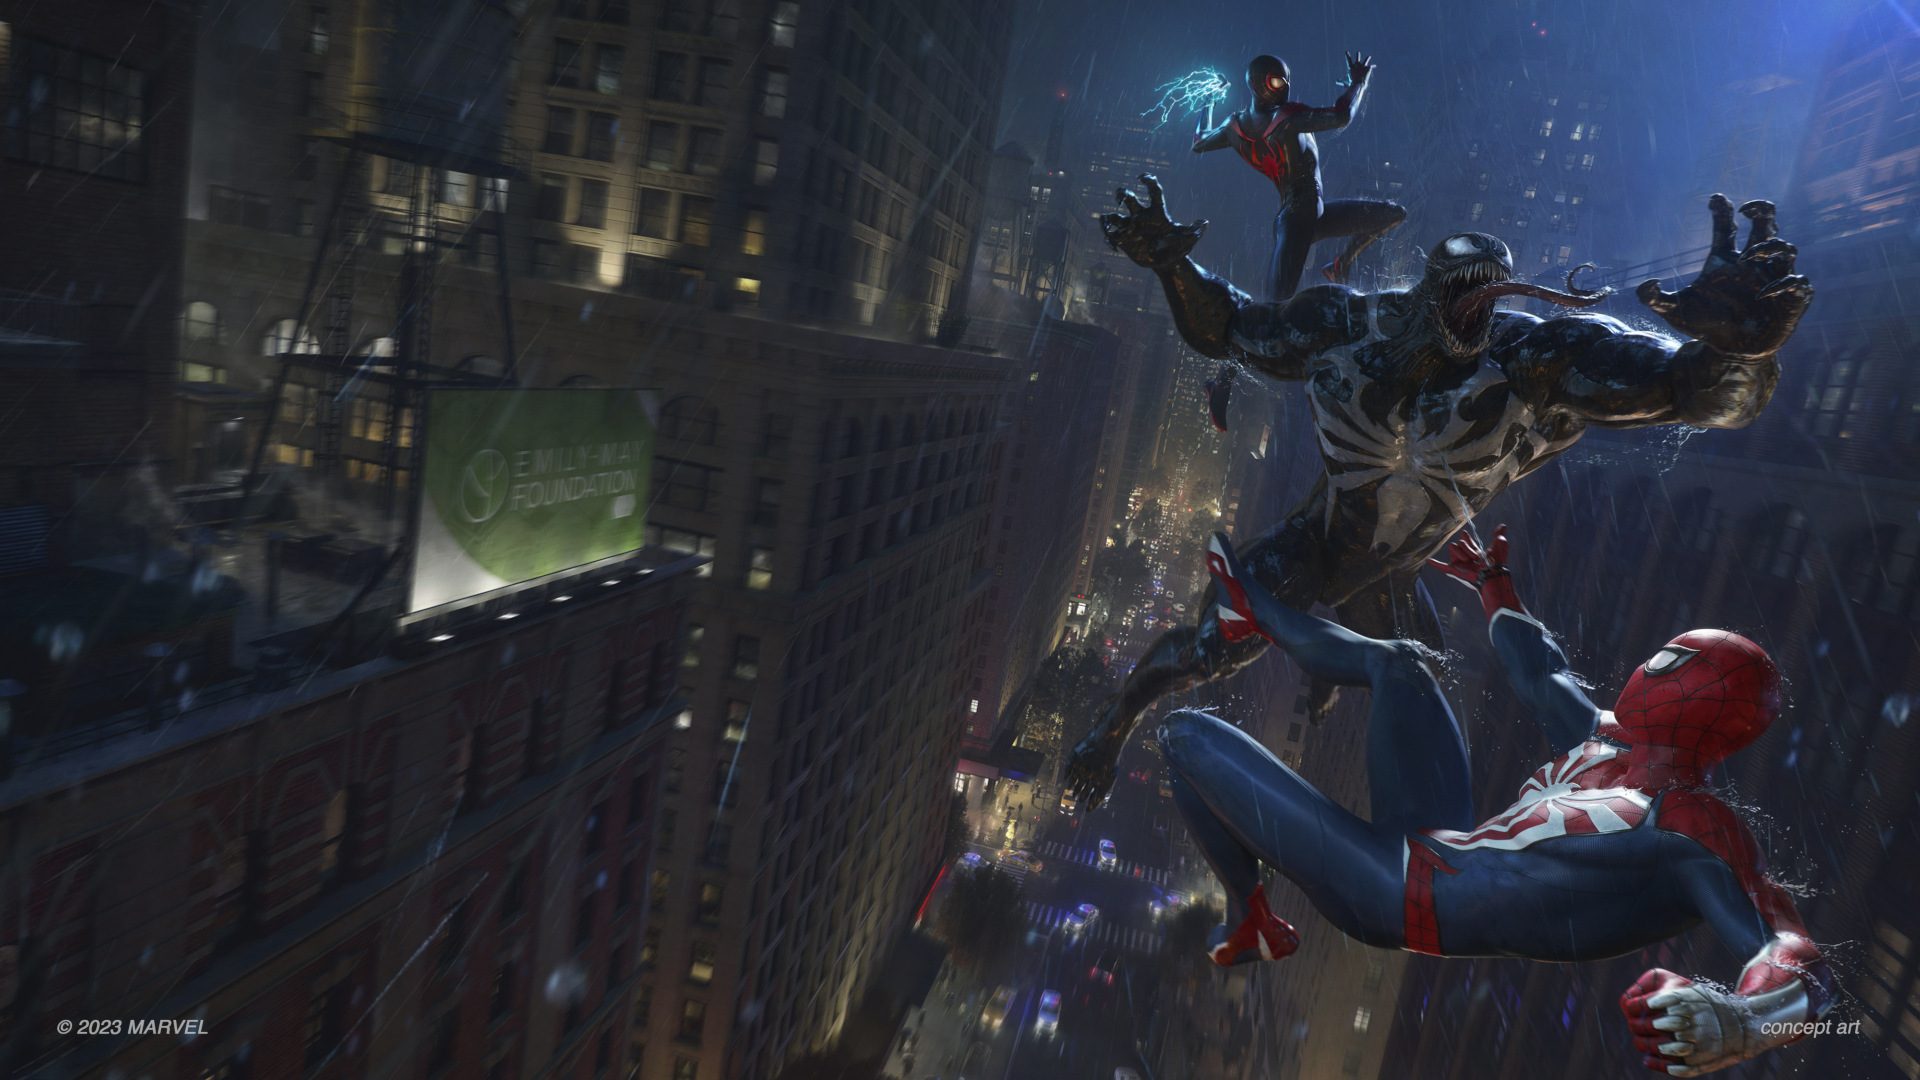 Amazing Spider-Man 2 Live WP (Premium) v2.13 APK Download For Android